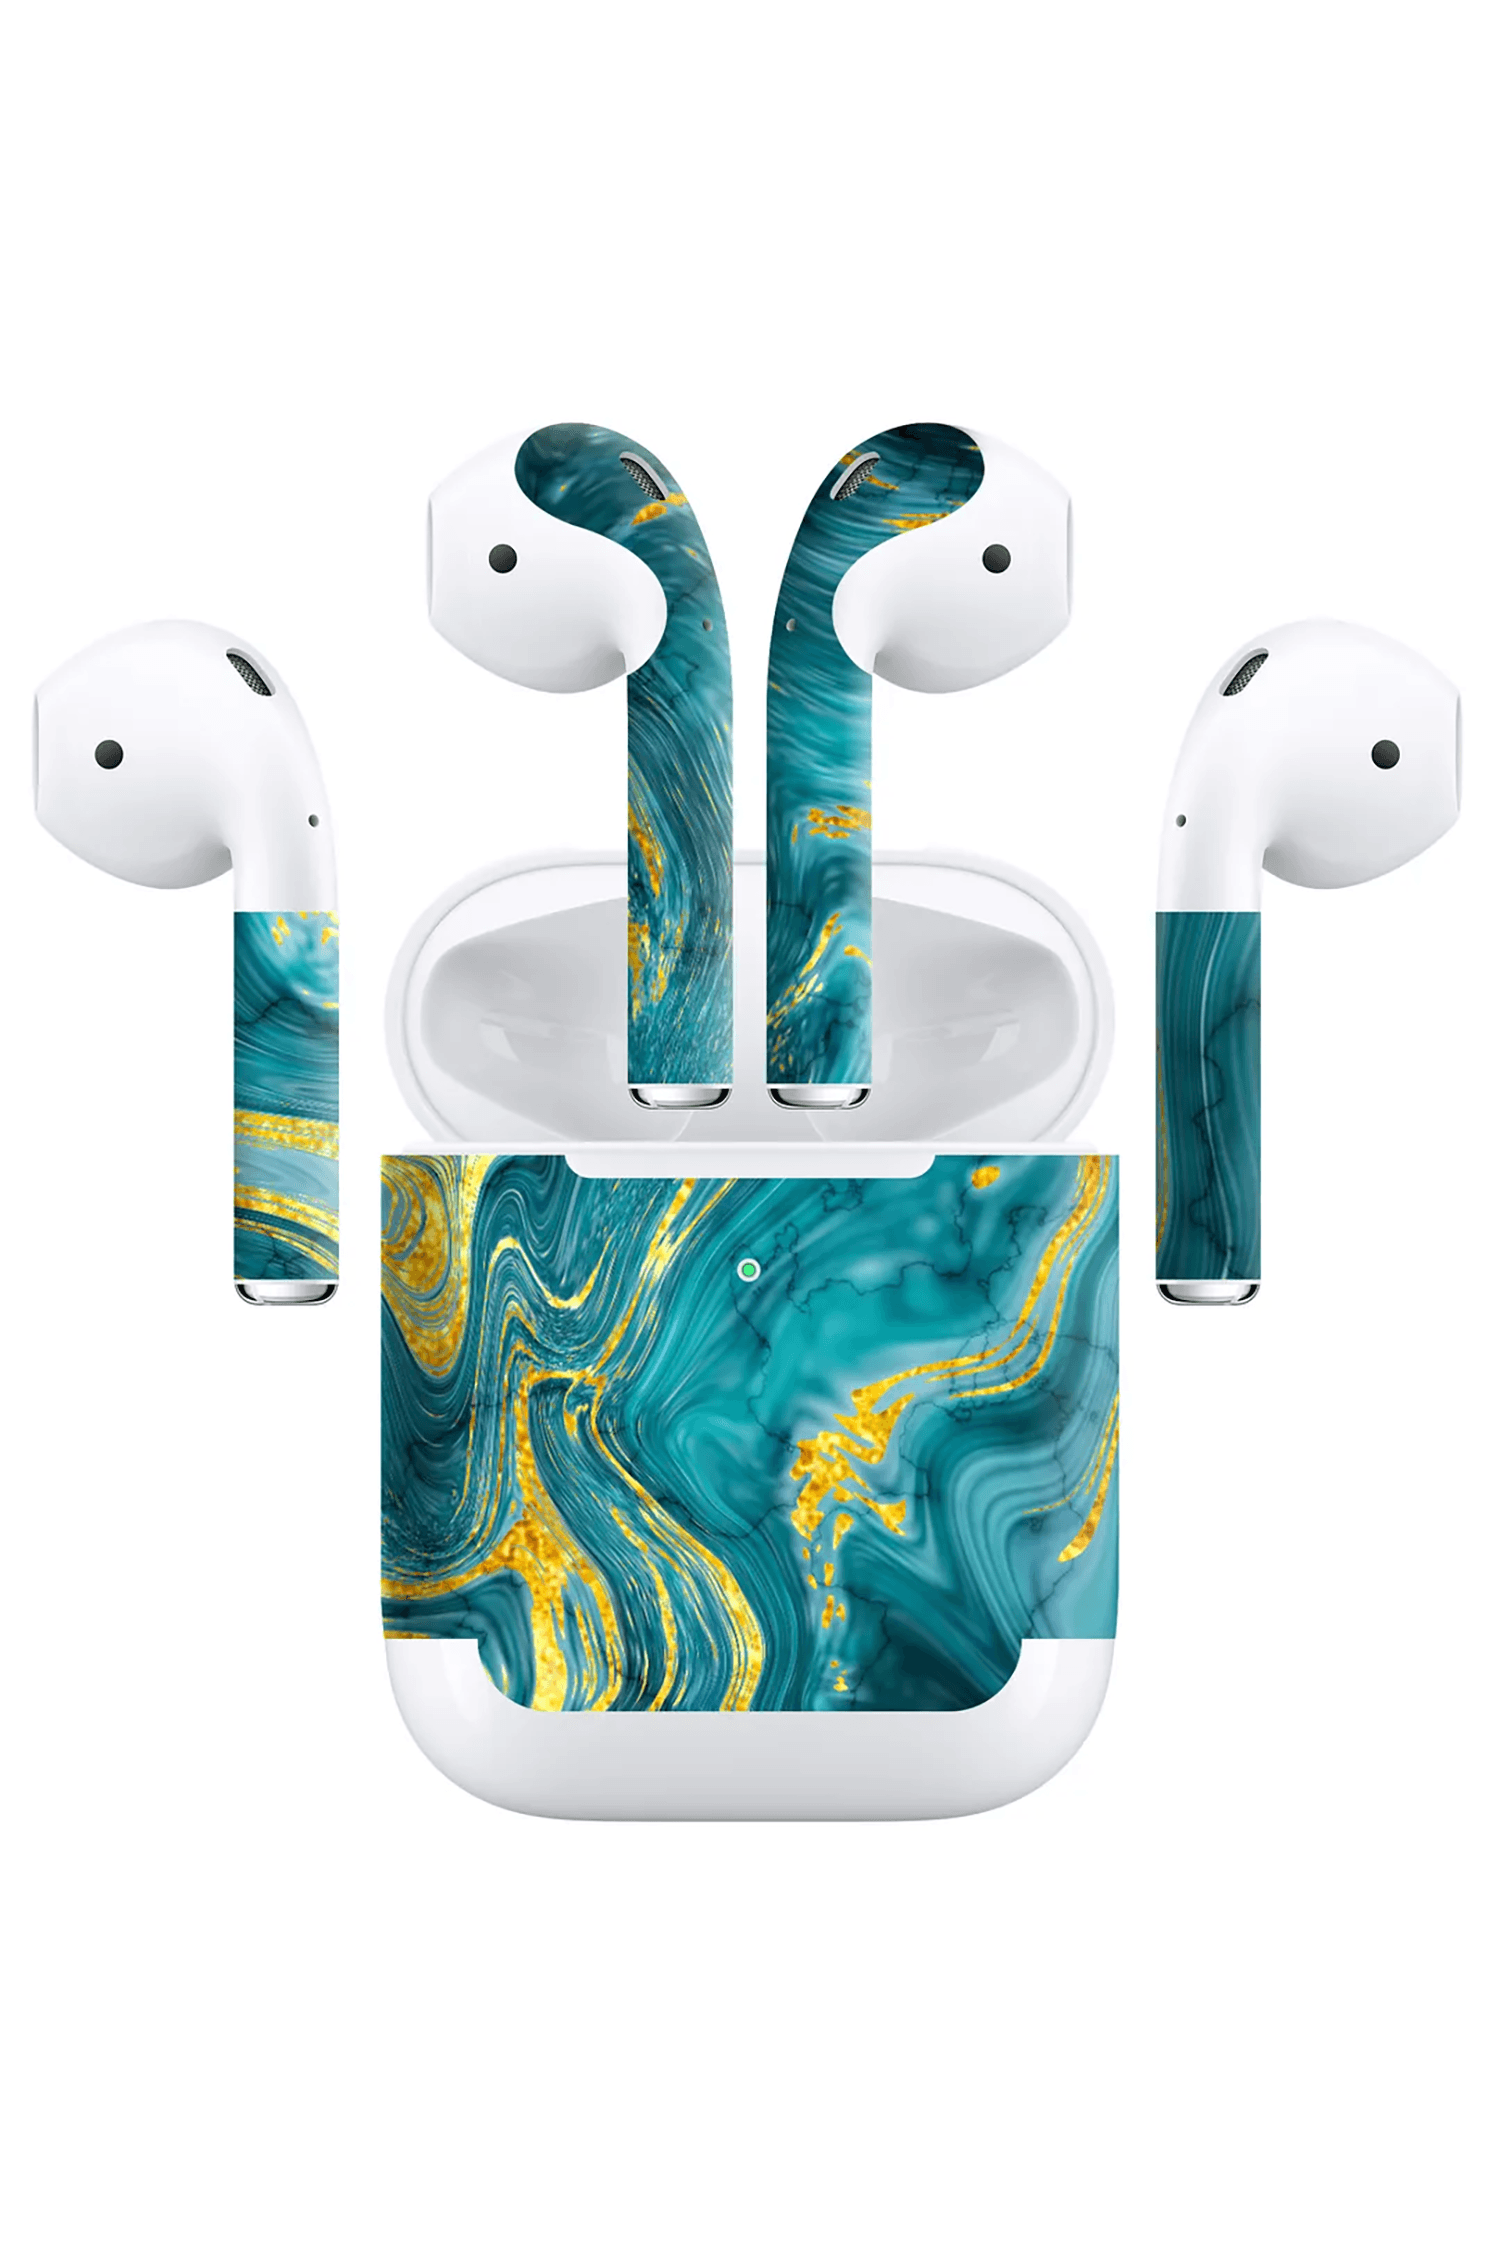 Airpods (Gen 2 Wireless) Skin Mystic Turquoise Wave